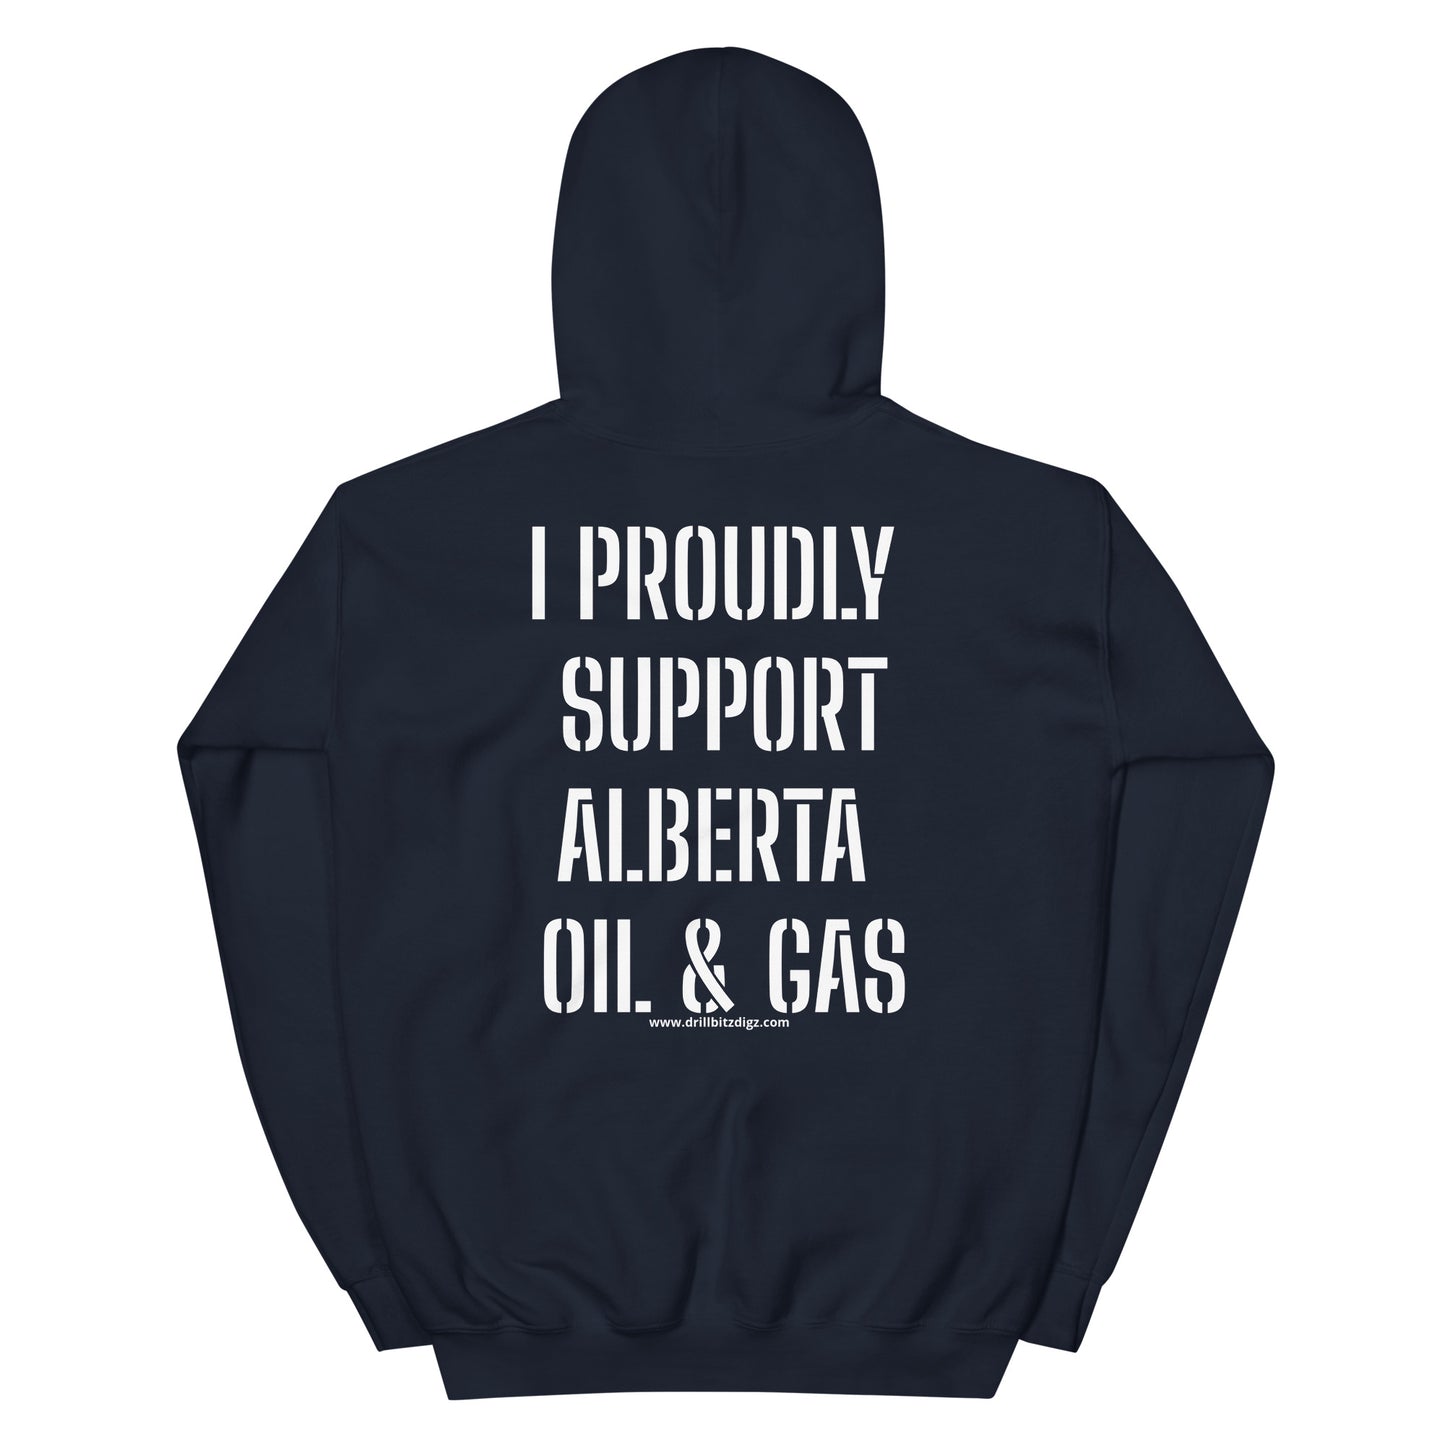 I PROUDLY SUPPORT ALBERTA OIL & GAS  Hoodie